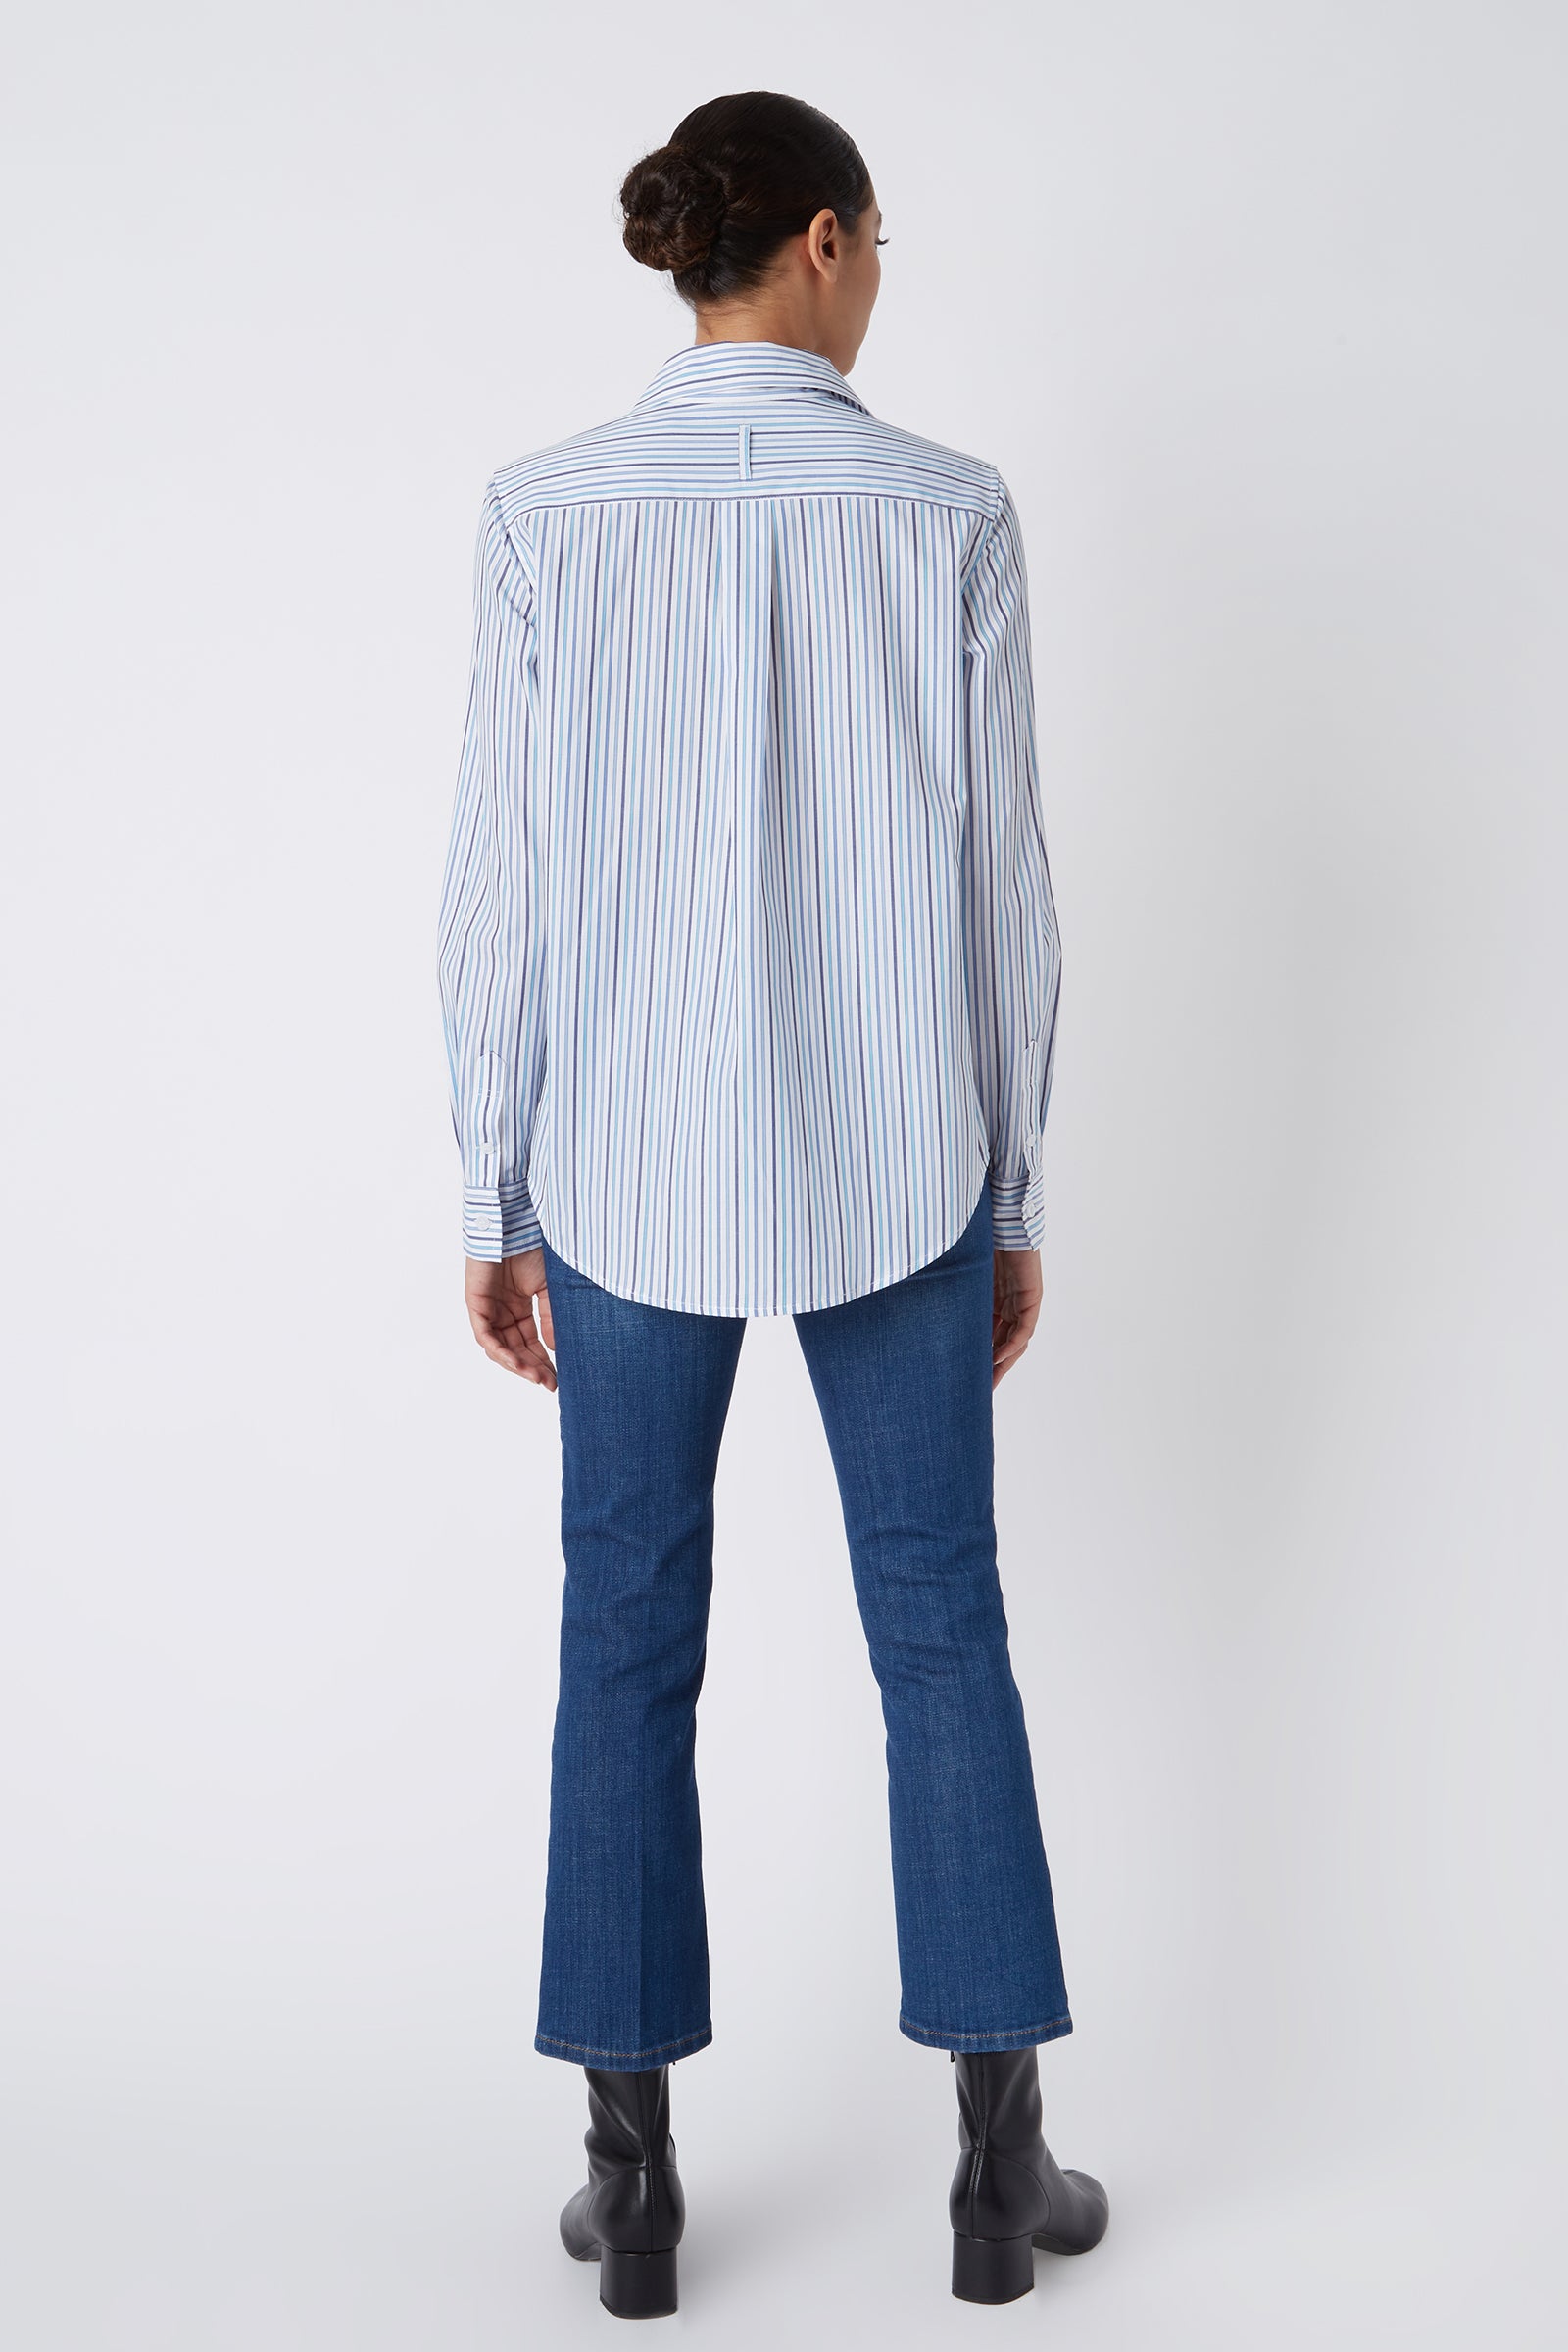 Kal Rieman Ginna Box Pleat Shirt in Multi Stripe Navy on Model Looking Right Cropped Front View